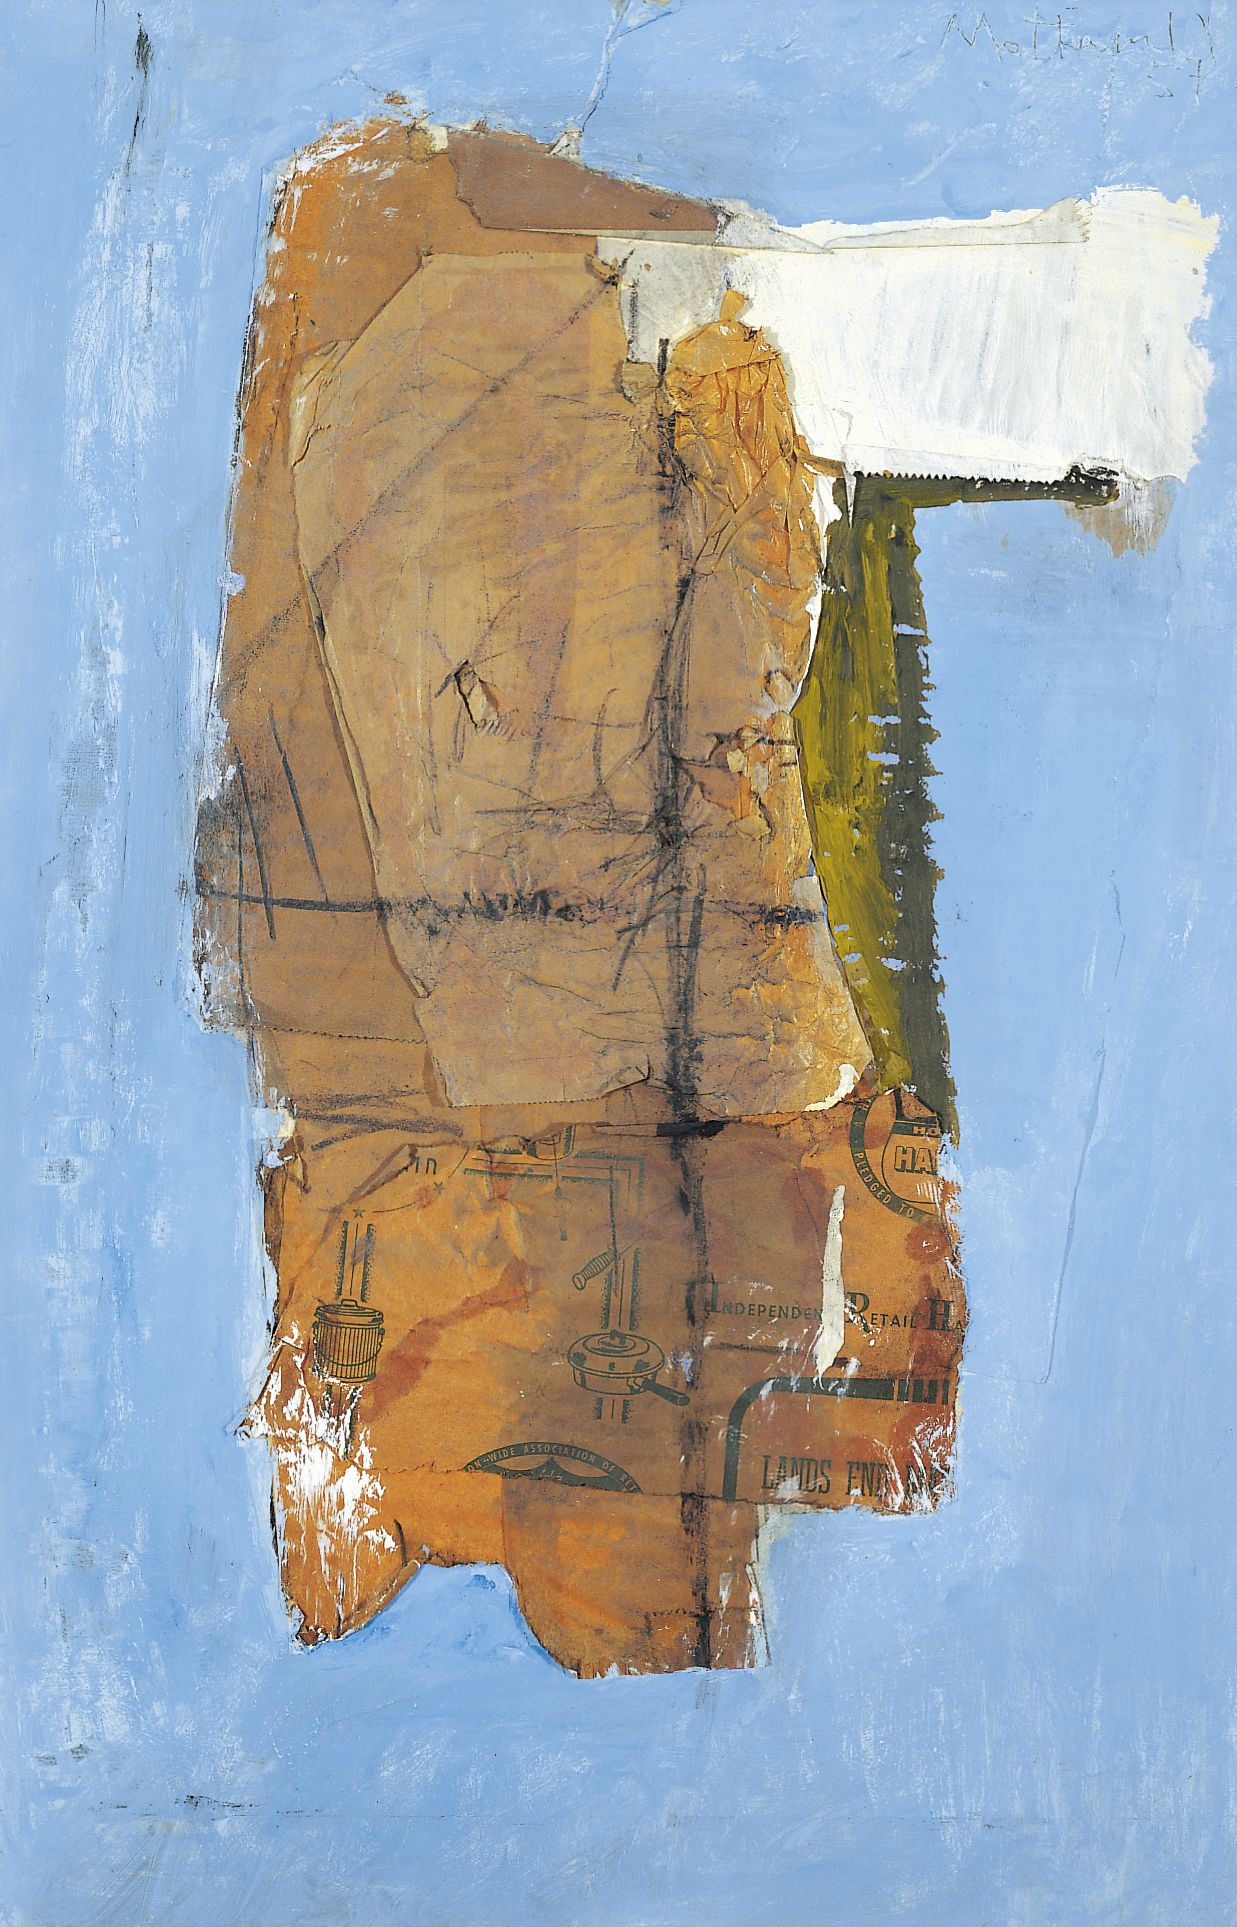 Helen’s Collage, 1957. Oil, pasted papers, and charcoal on paperboard, 30 x 19 ½ inches (76.2 x 49.5 cm)